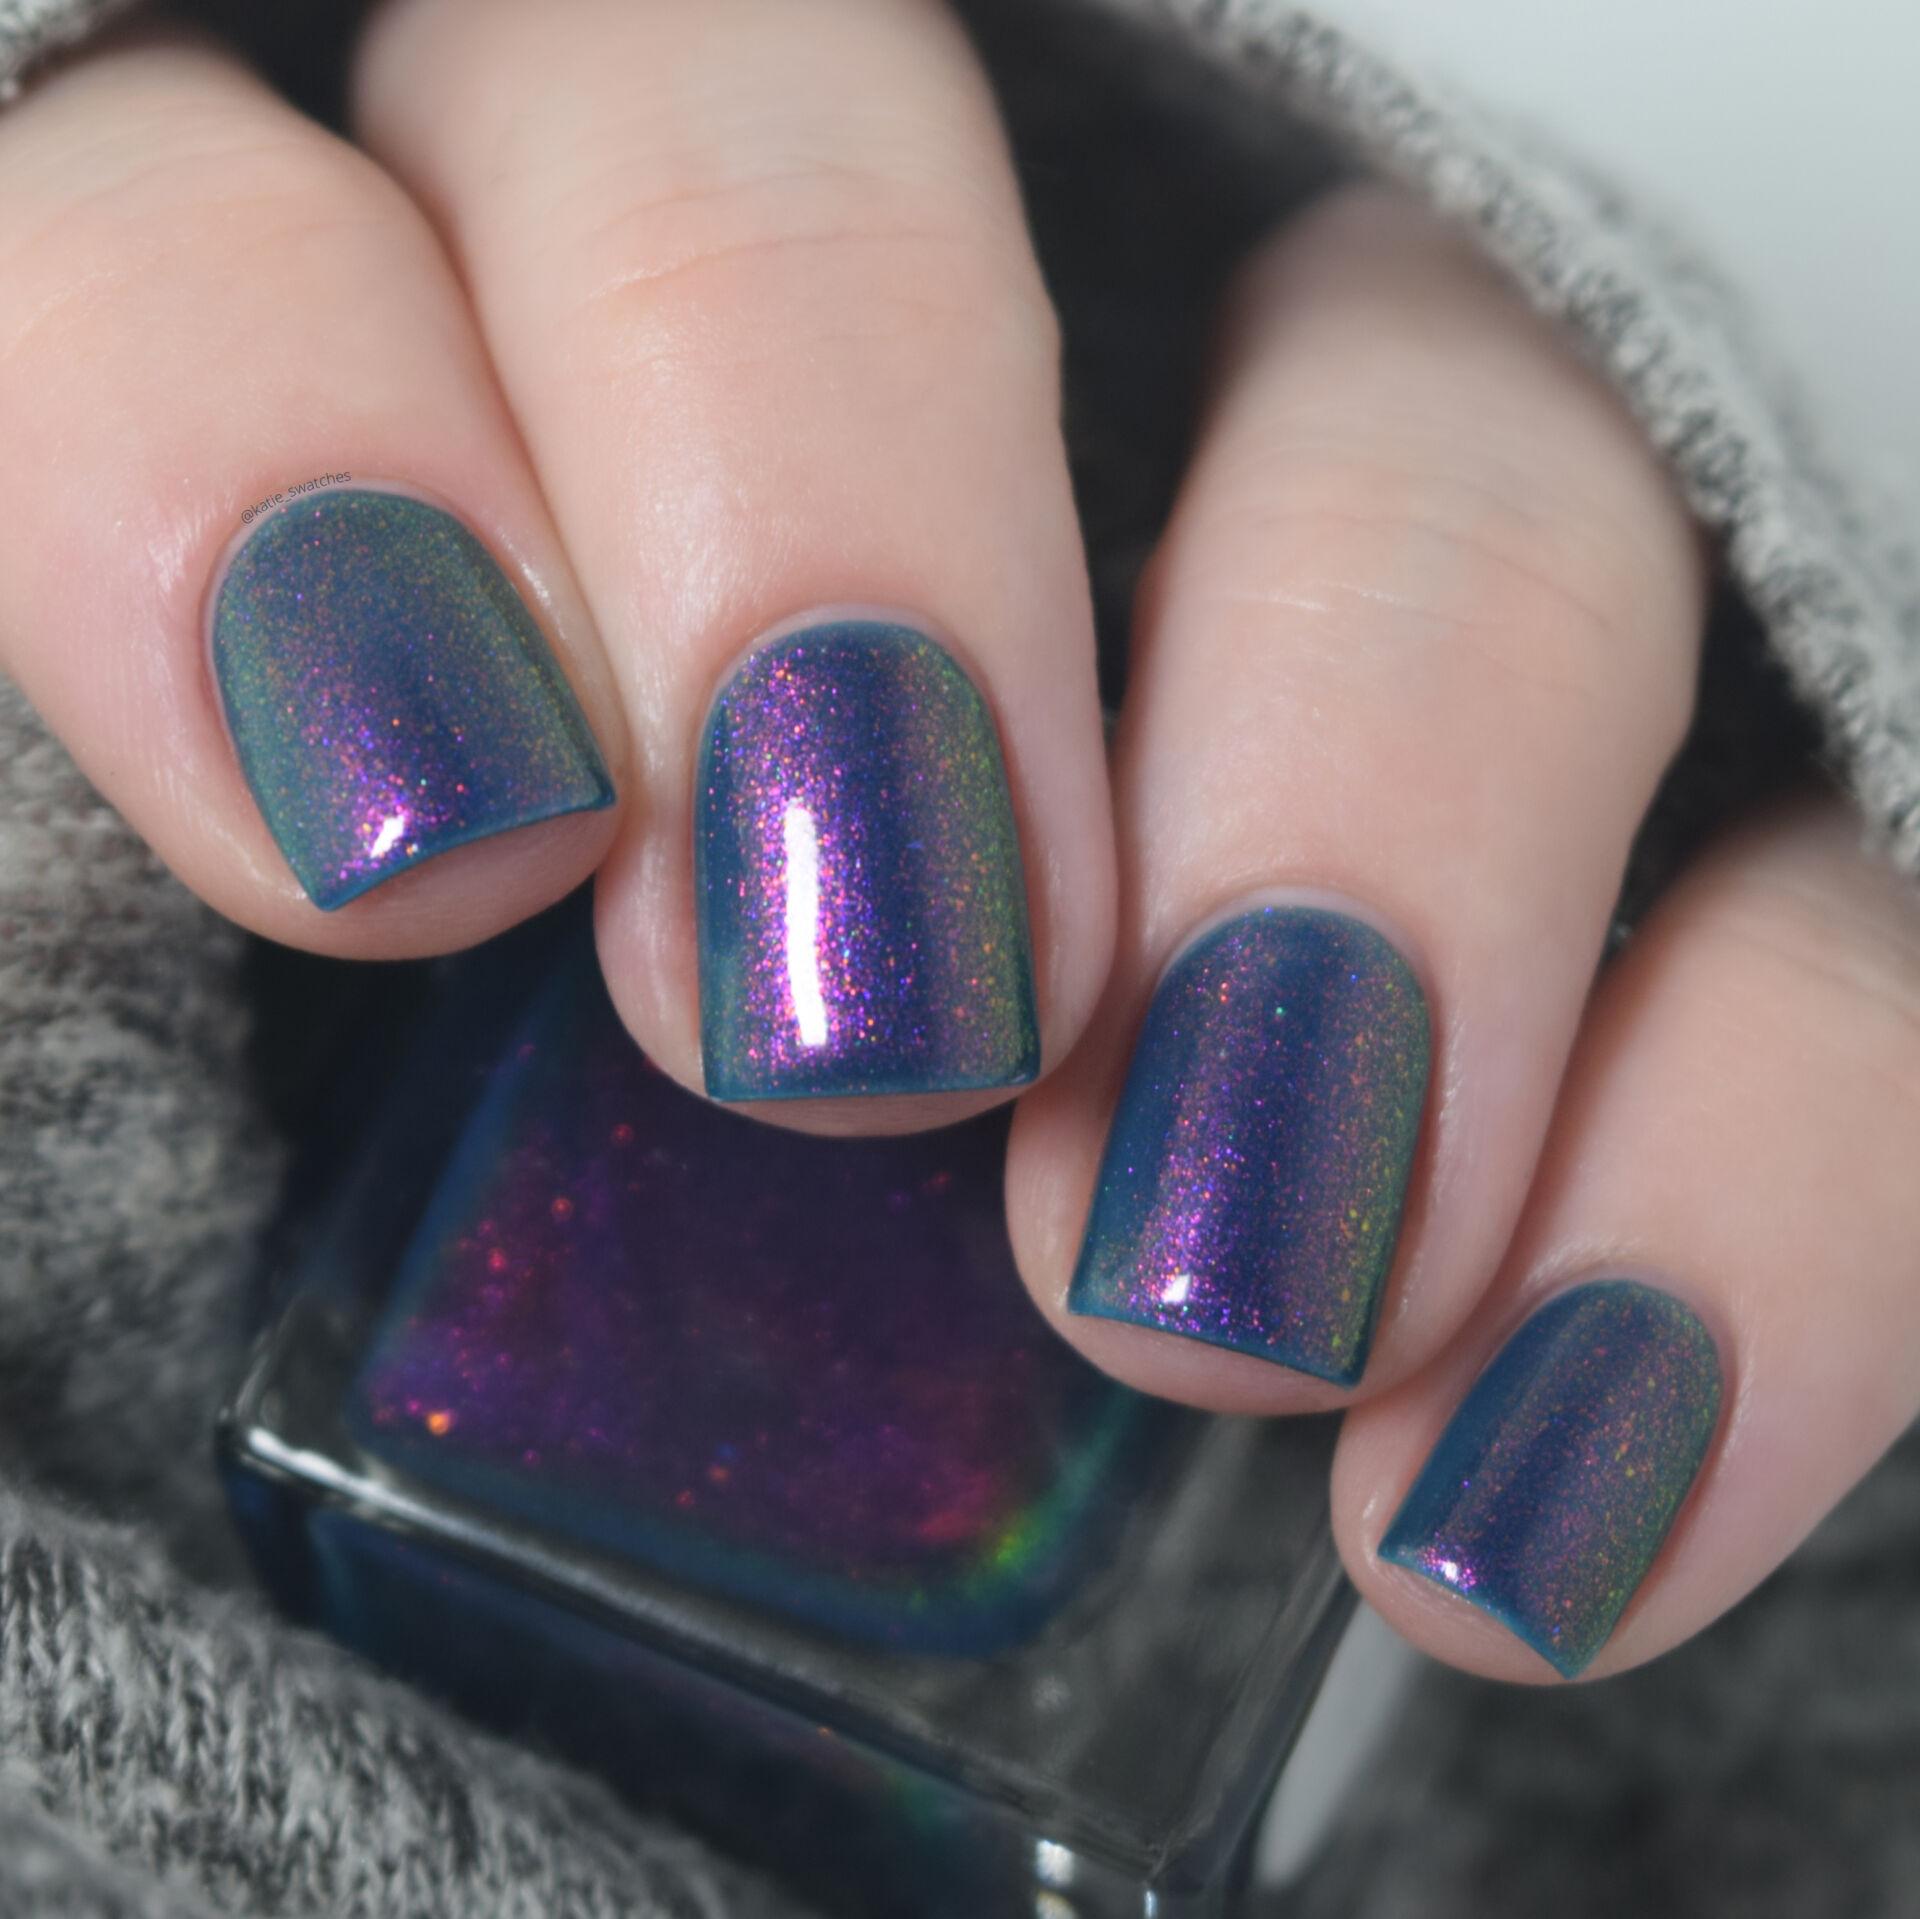 Lemming Lacquer Expanding Consciousness is a deep capri blue jelly packed with red-violet to pink to gold to green shifting shimmer. Nail polish swatch Polish Pickup PPU Exclusive